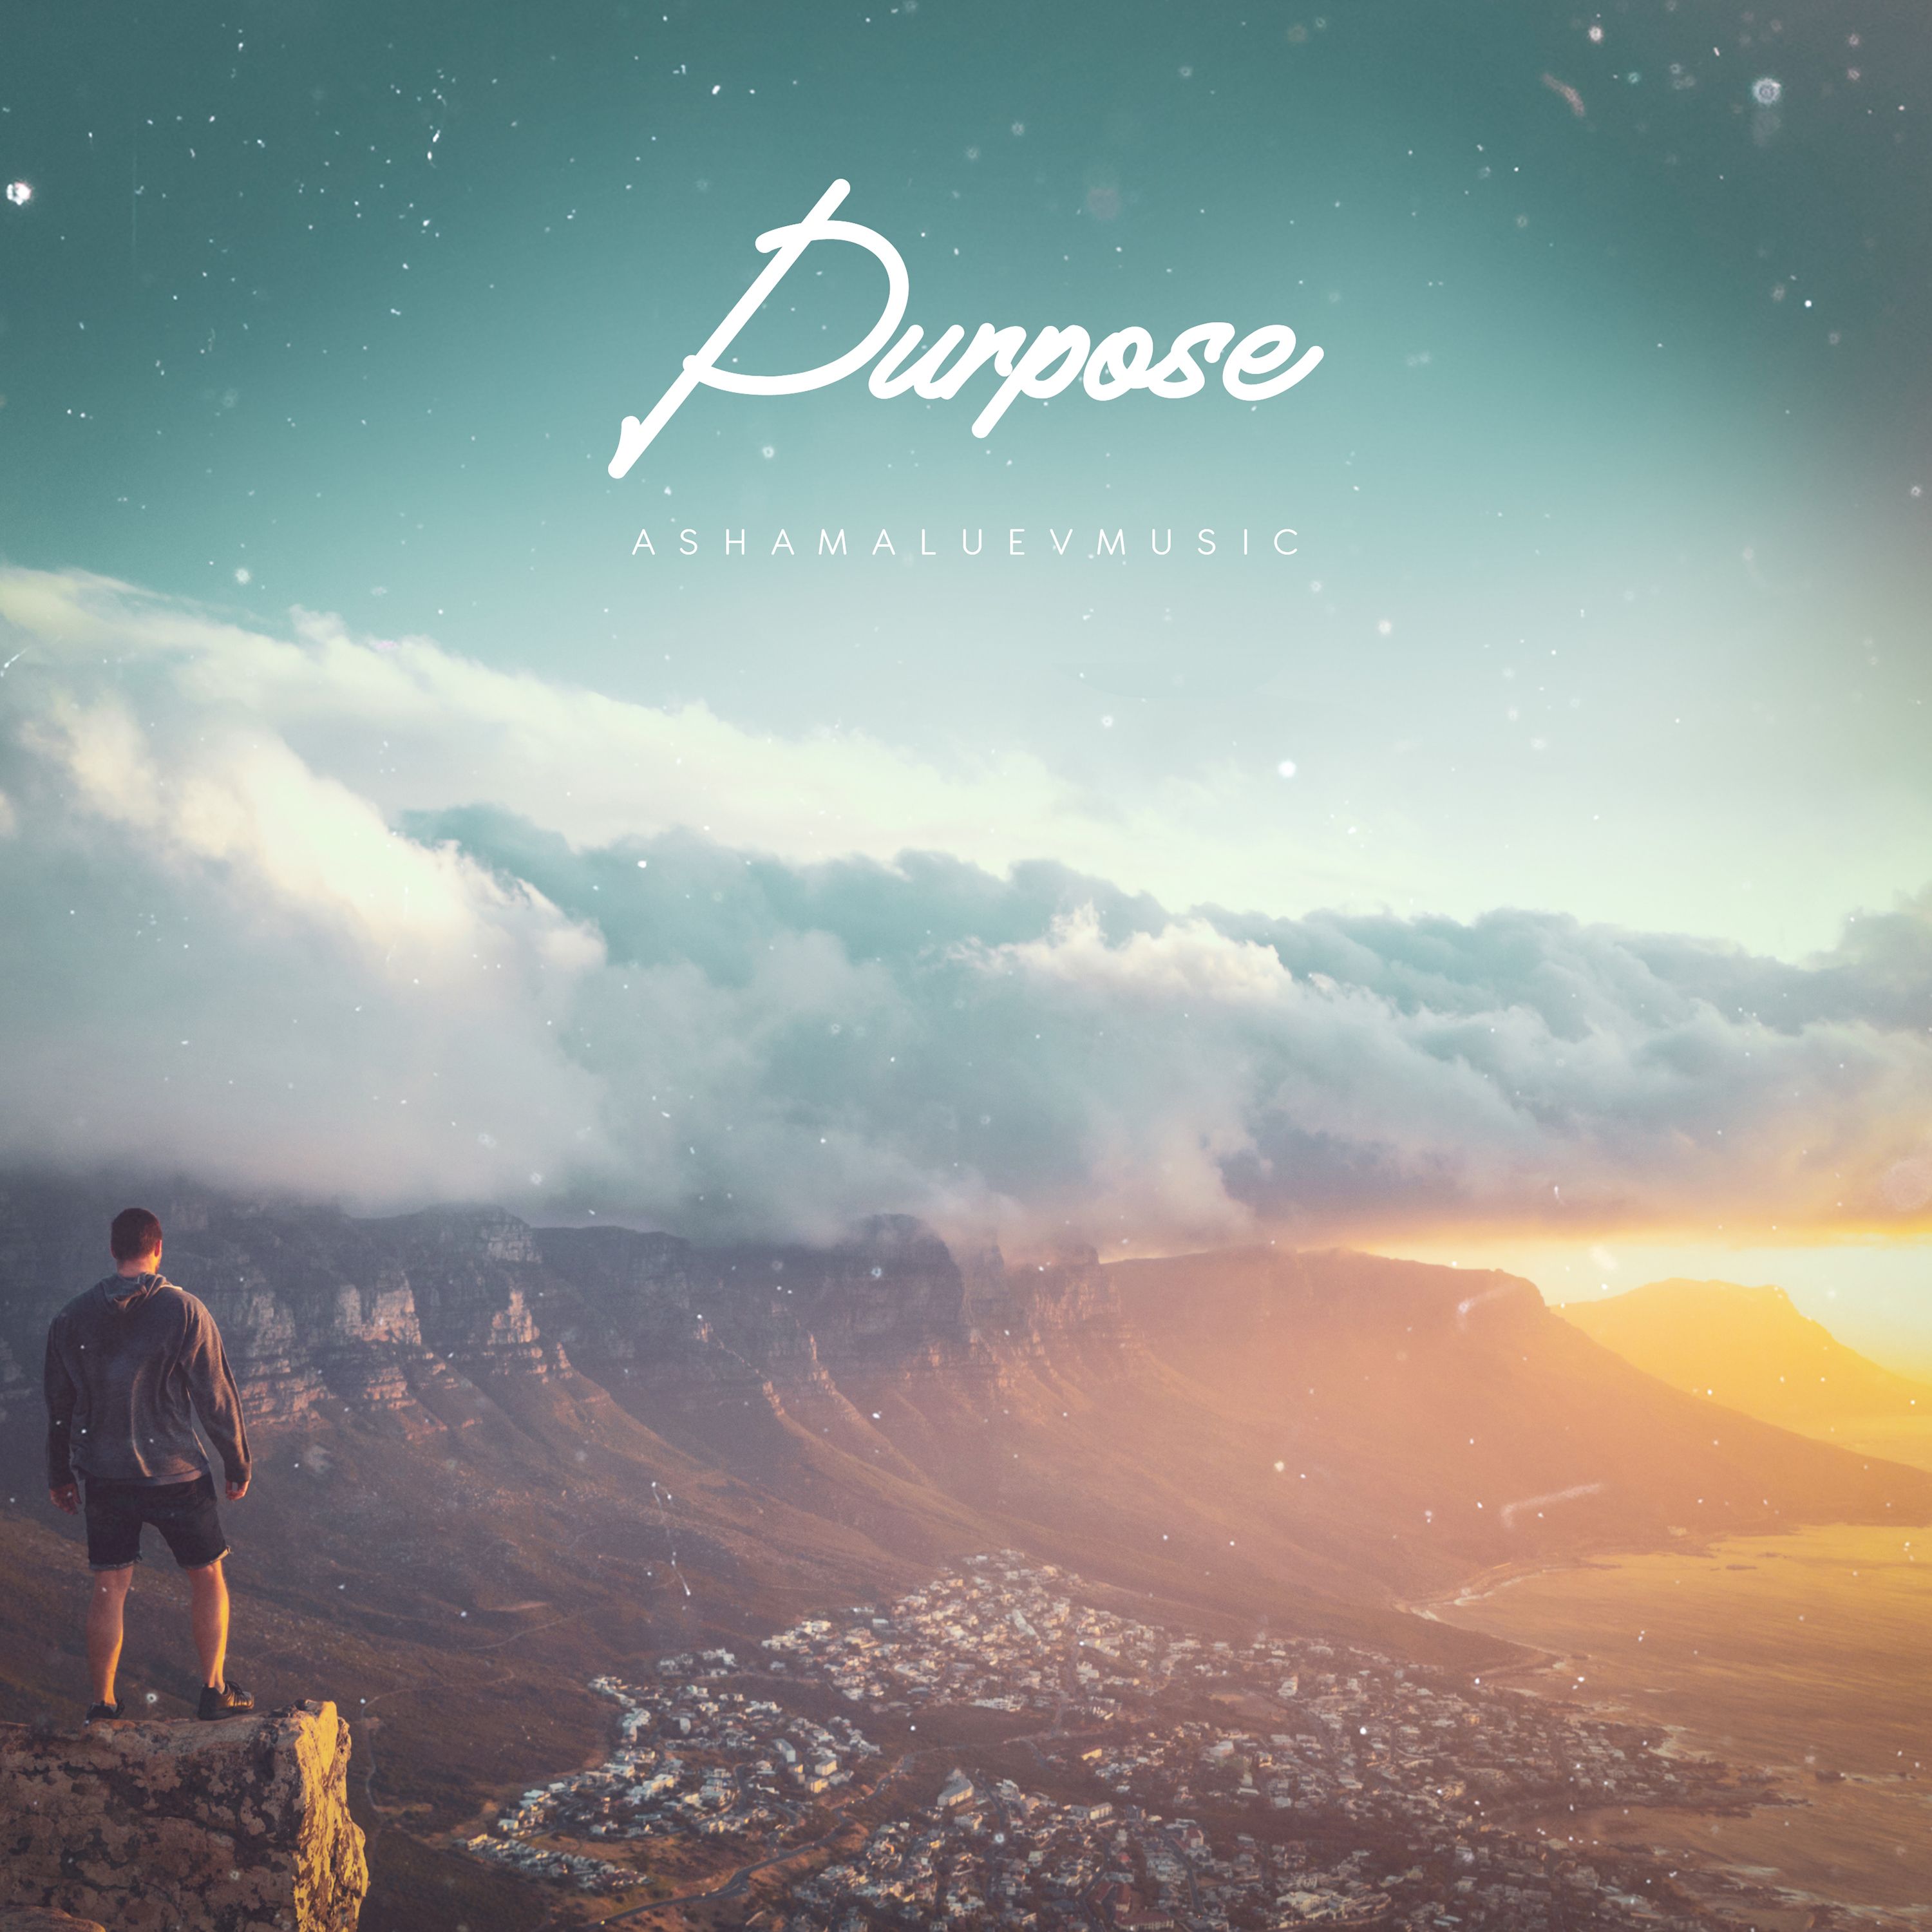 Purpose - Inspirational and Uplifting Cinematic Background Music For Videos